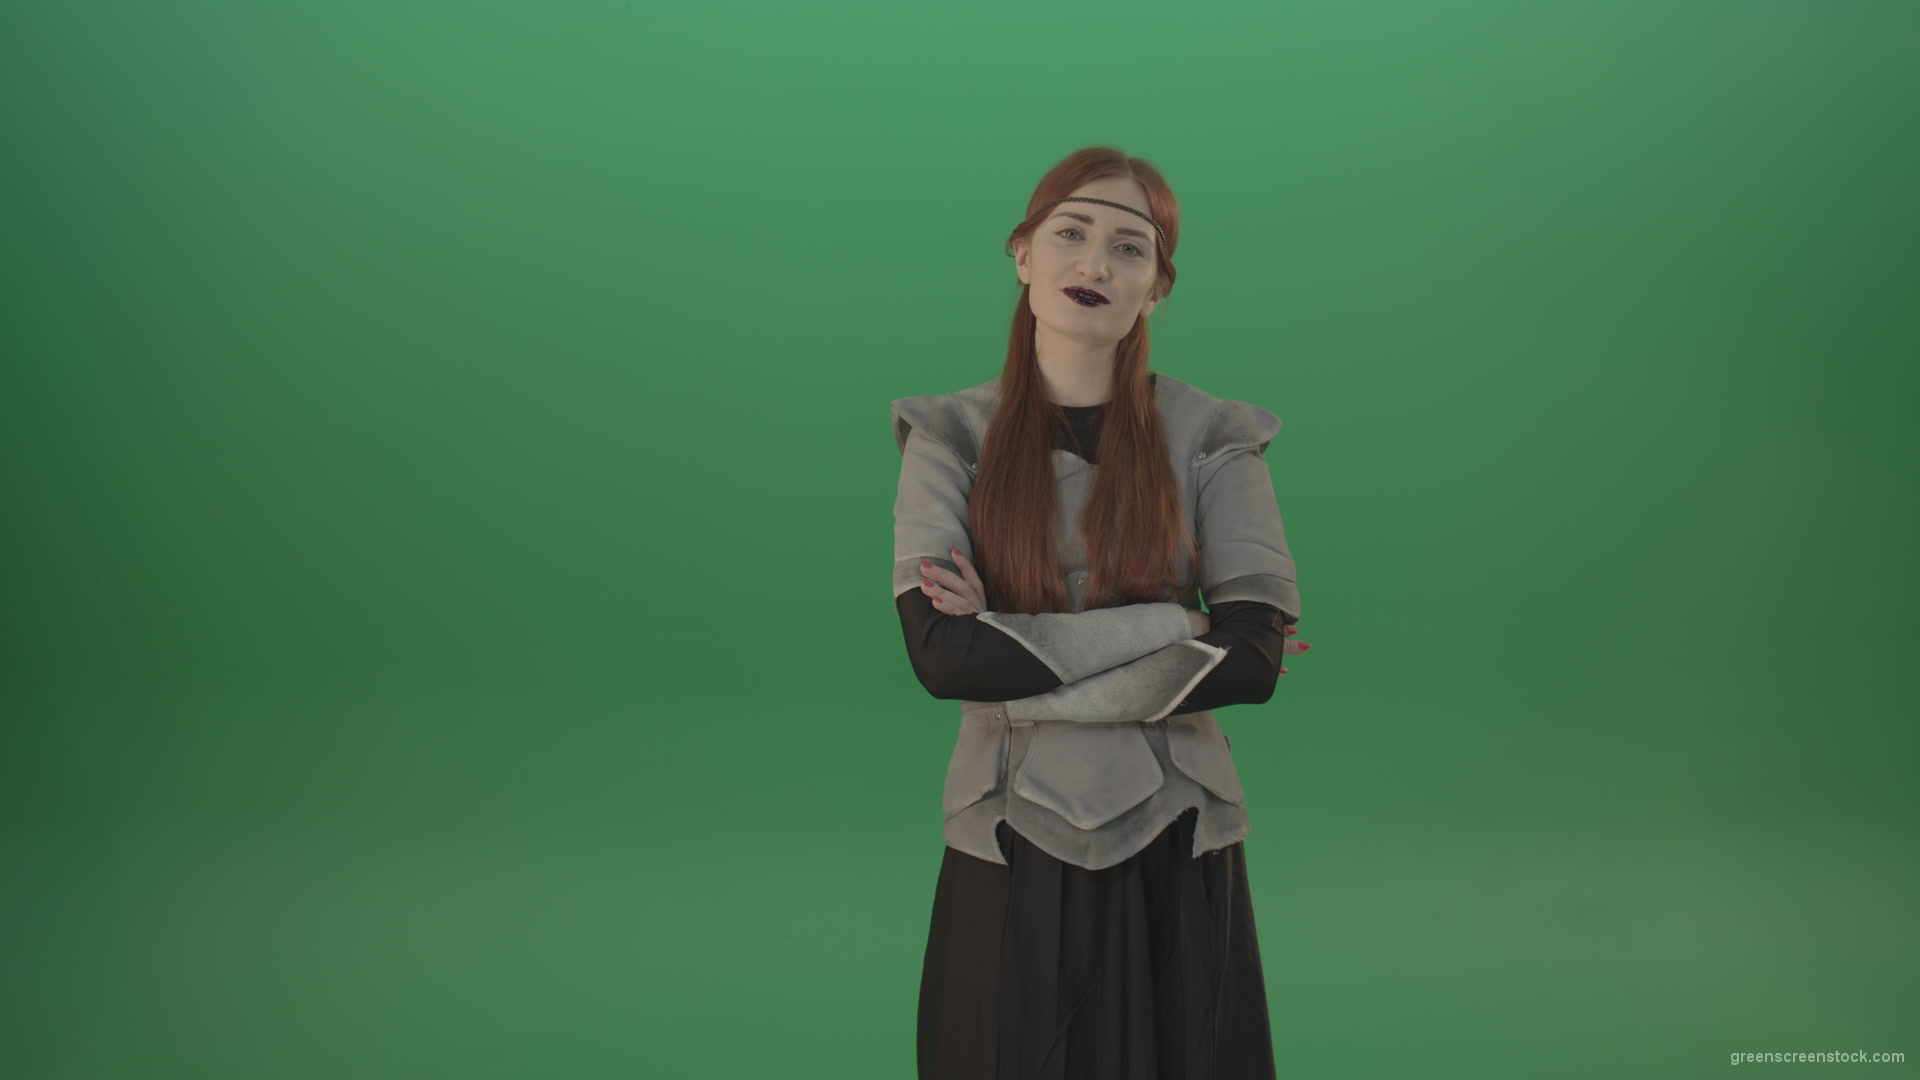 Girl-in-a-medieval-wig-costume-laughs-on-a-green-background-1_001 Green Screen Stock